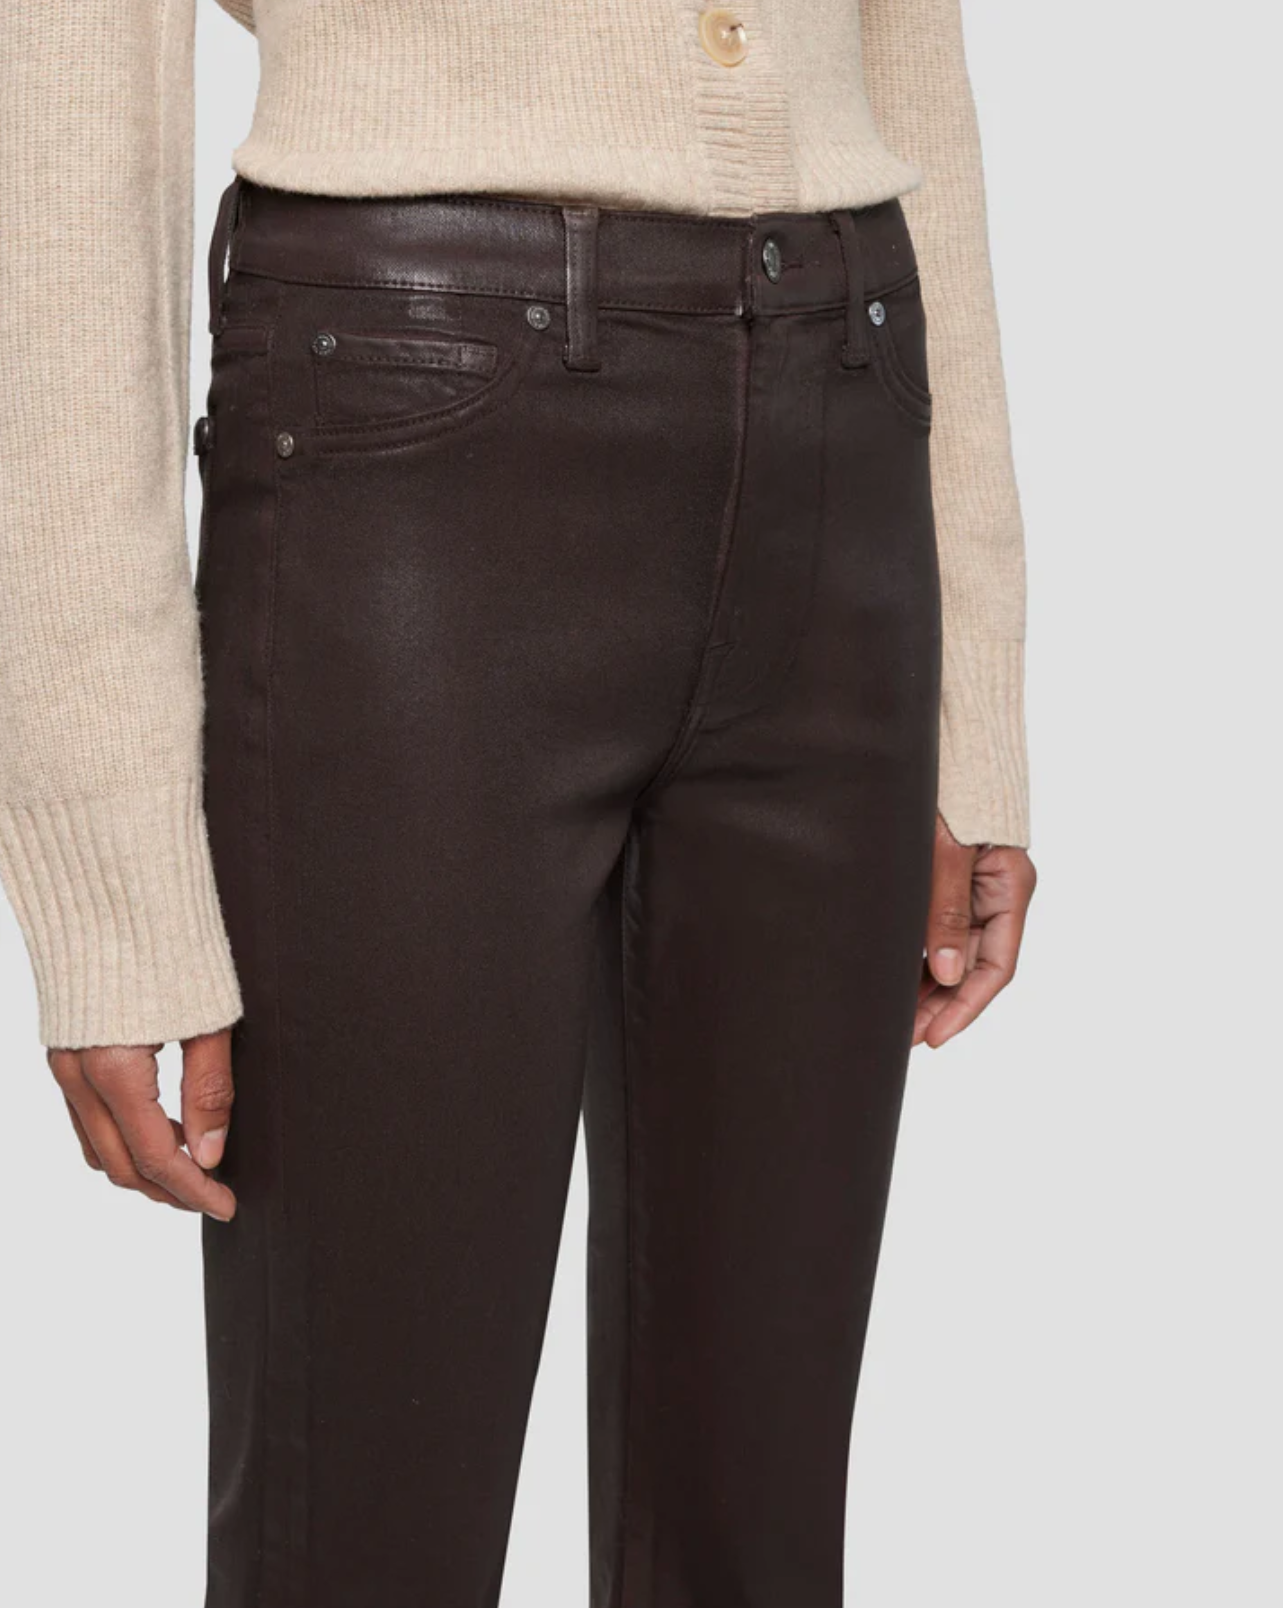 waistline close up of 7 for all mankind&#39;s high waist slim kick coated pant in chocolate brown